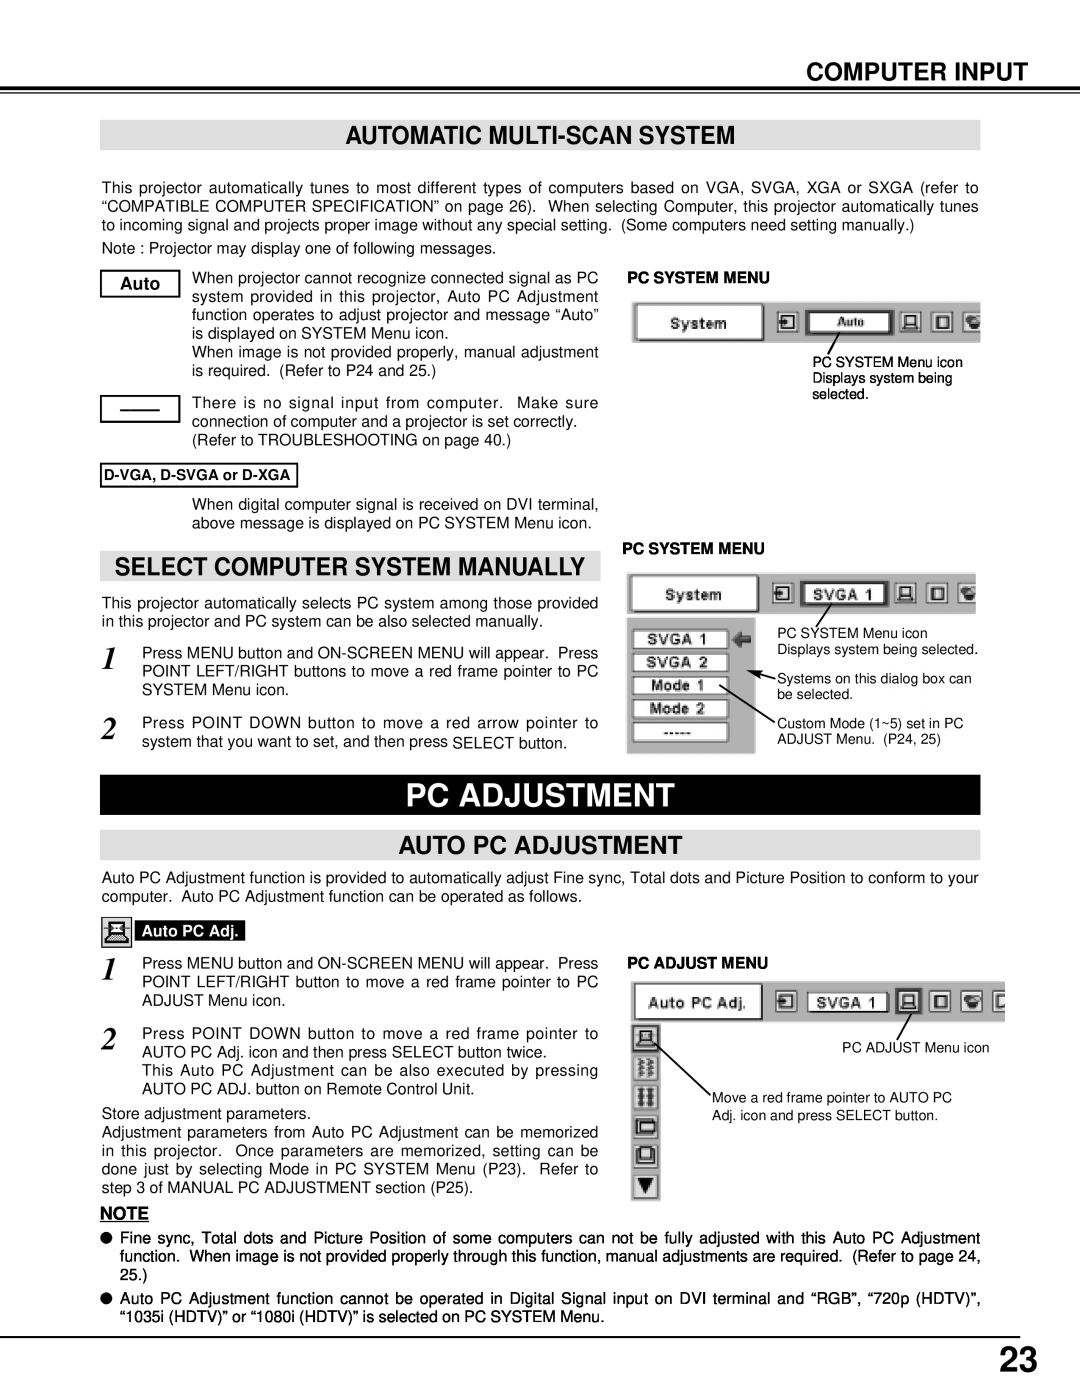 Eiki LC-X1000 Computer Input Automatic Multi-Scansystem, Auto Pc Adjustment, Select Computer System Manually 